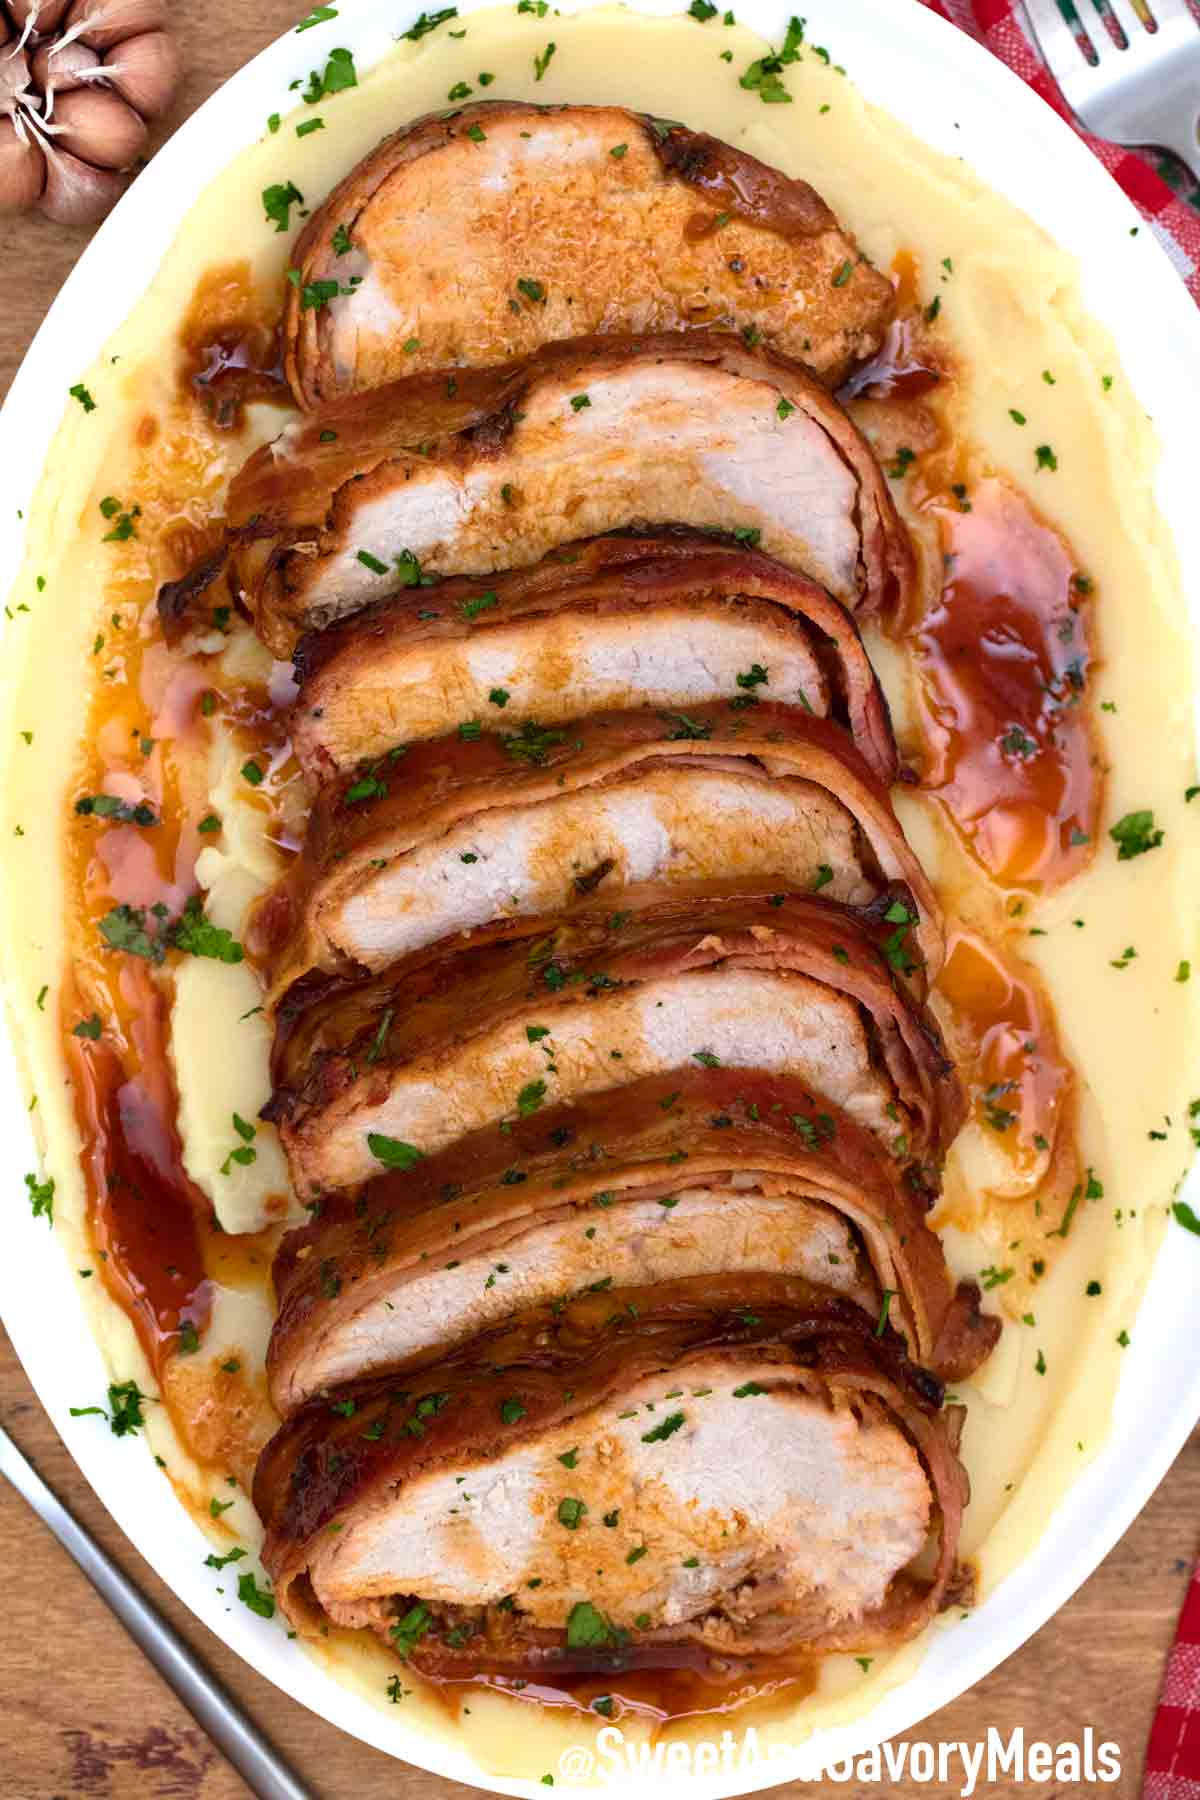 Crockpot Bacon Pork Loin Sweet And Savory Meals,Domesticated Fox Curly Tail